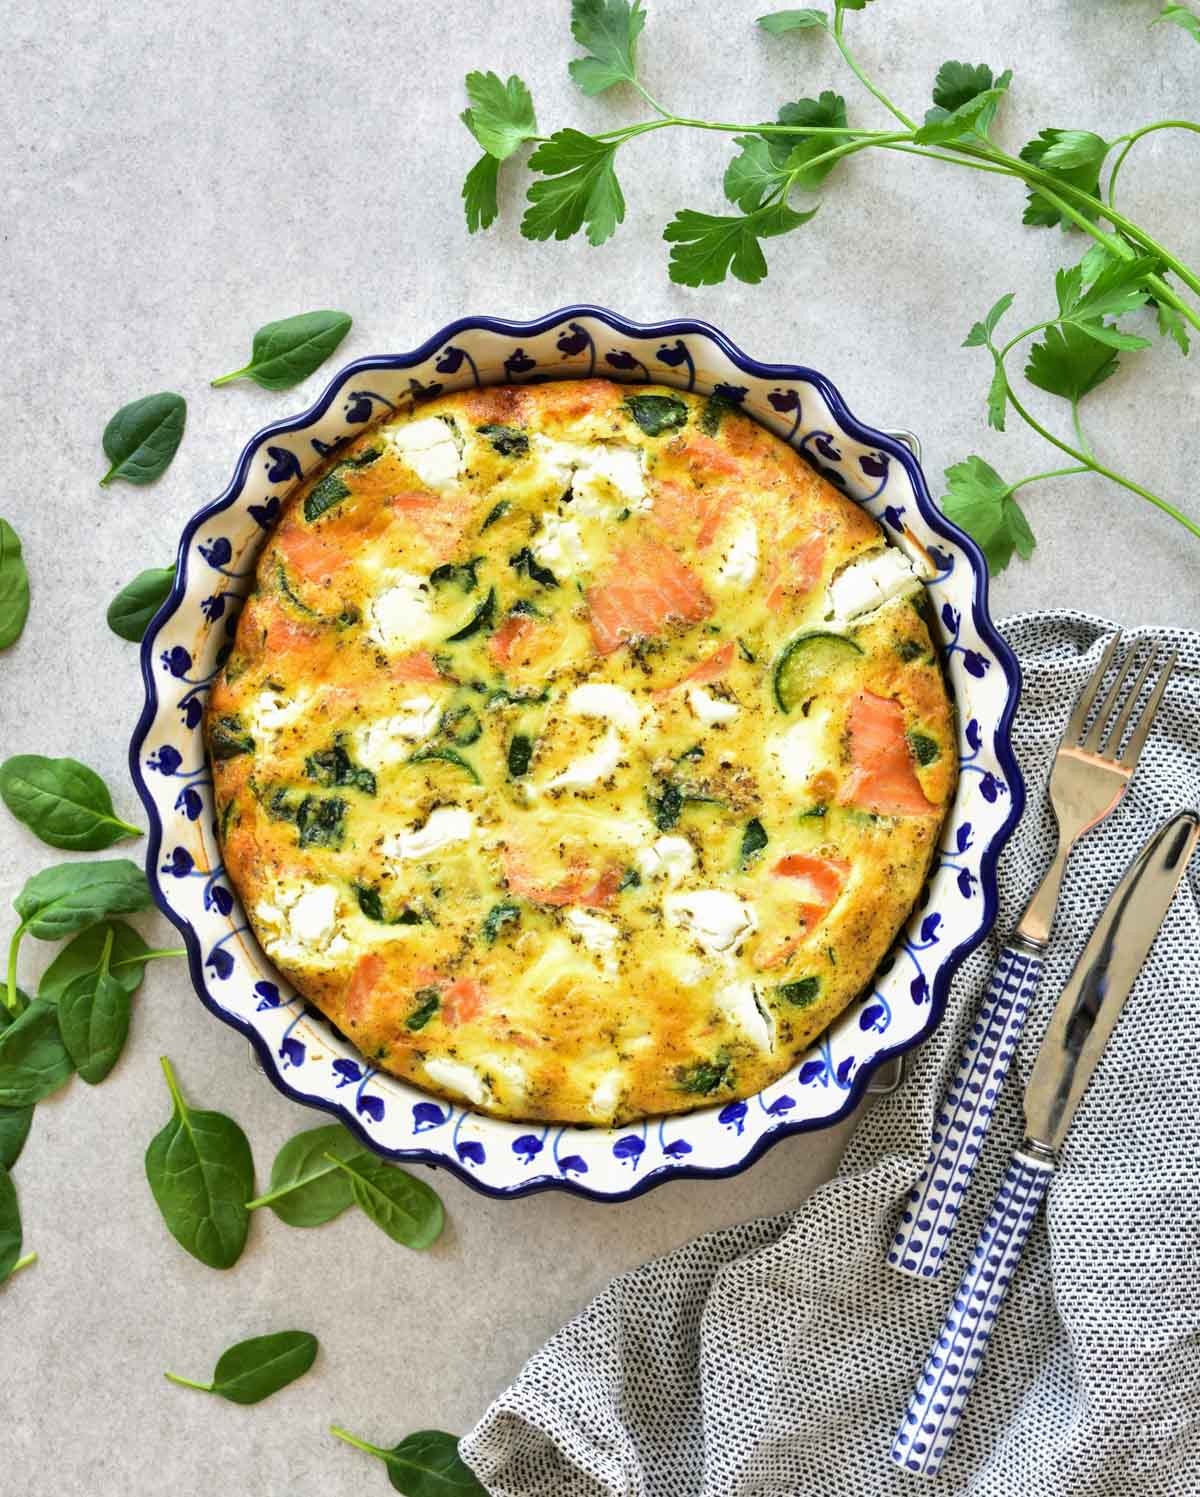 Smoked salmon frittata in a blue baking dish, parsley and spinach in the background.